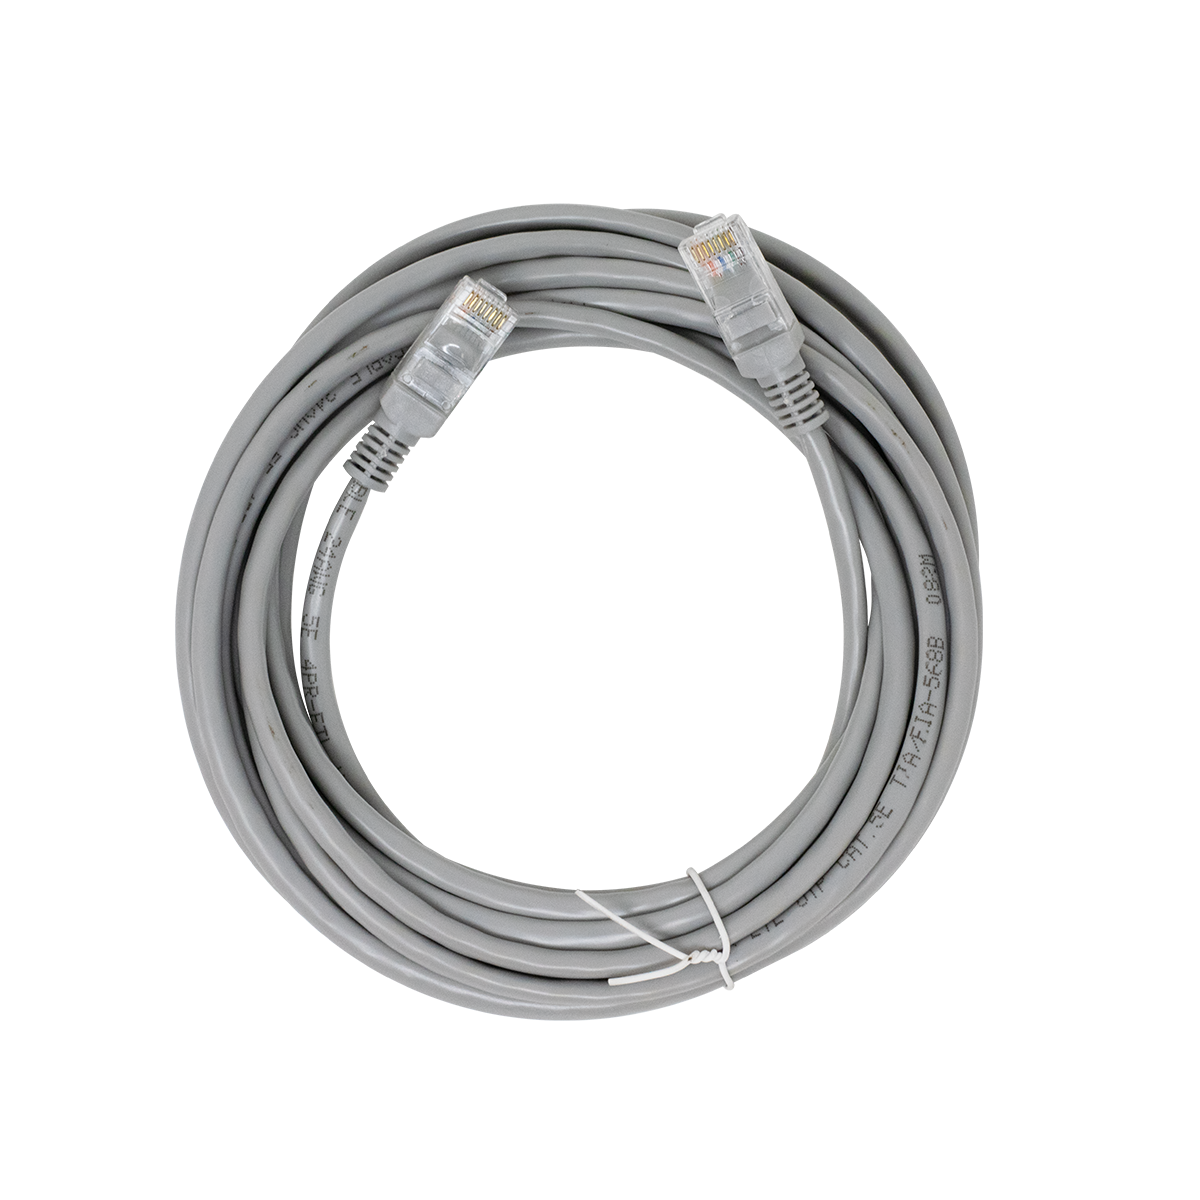 CAT5E, SLIM BOOTED, RJ45, 15 FT, GRAY, BAGGED